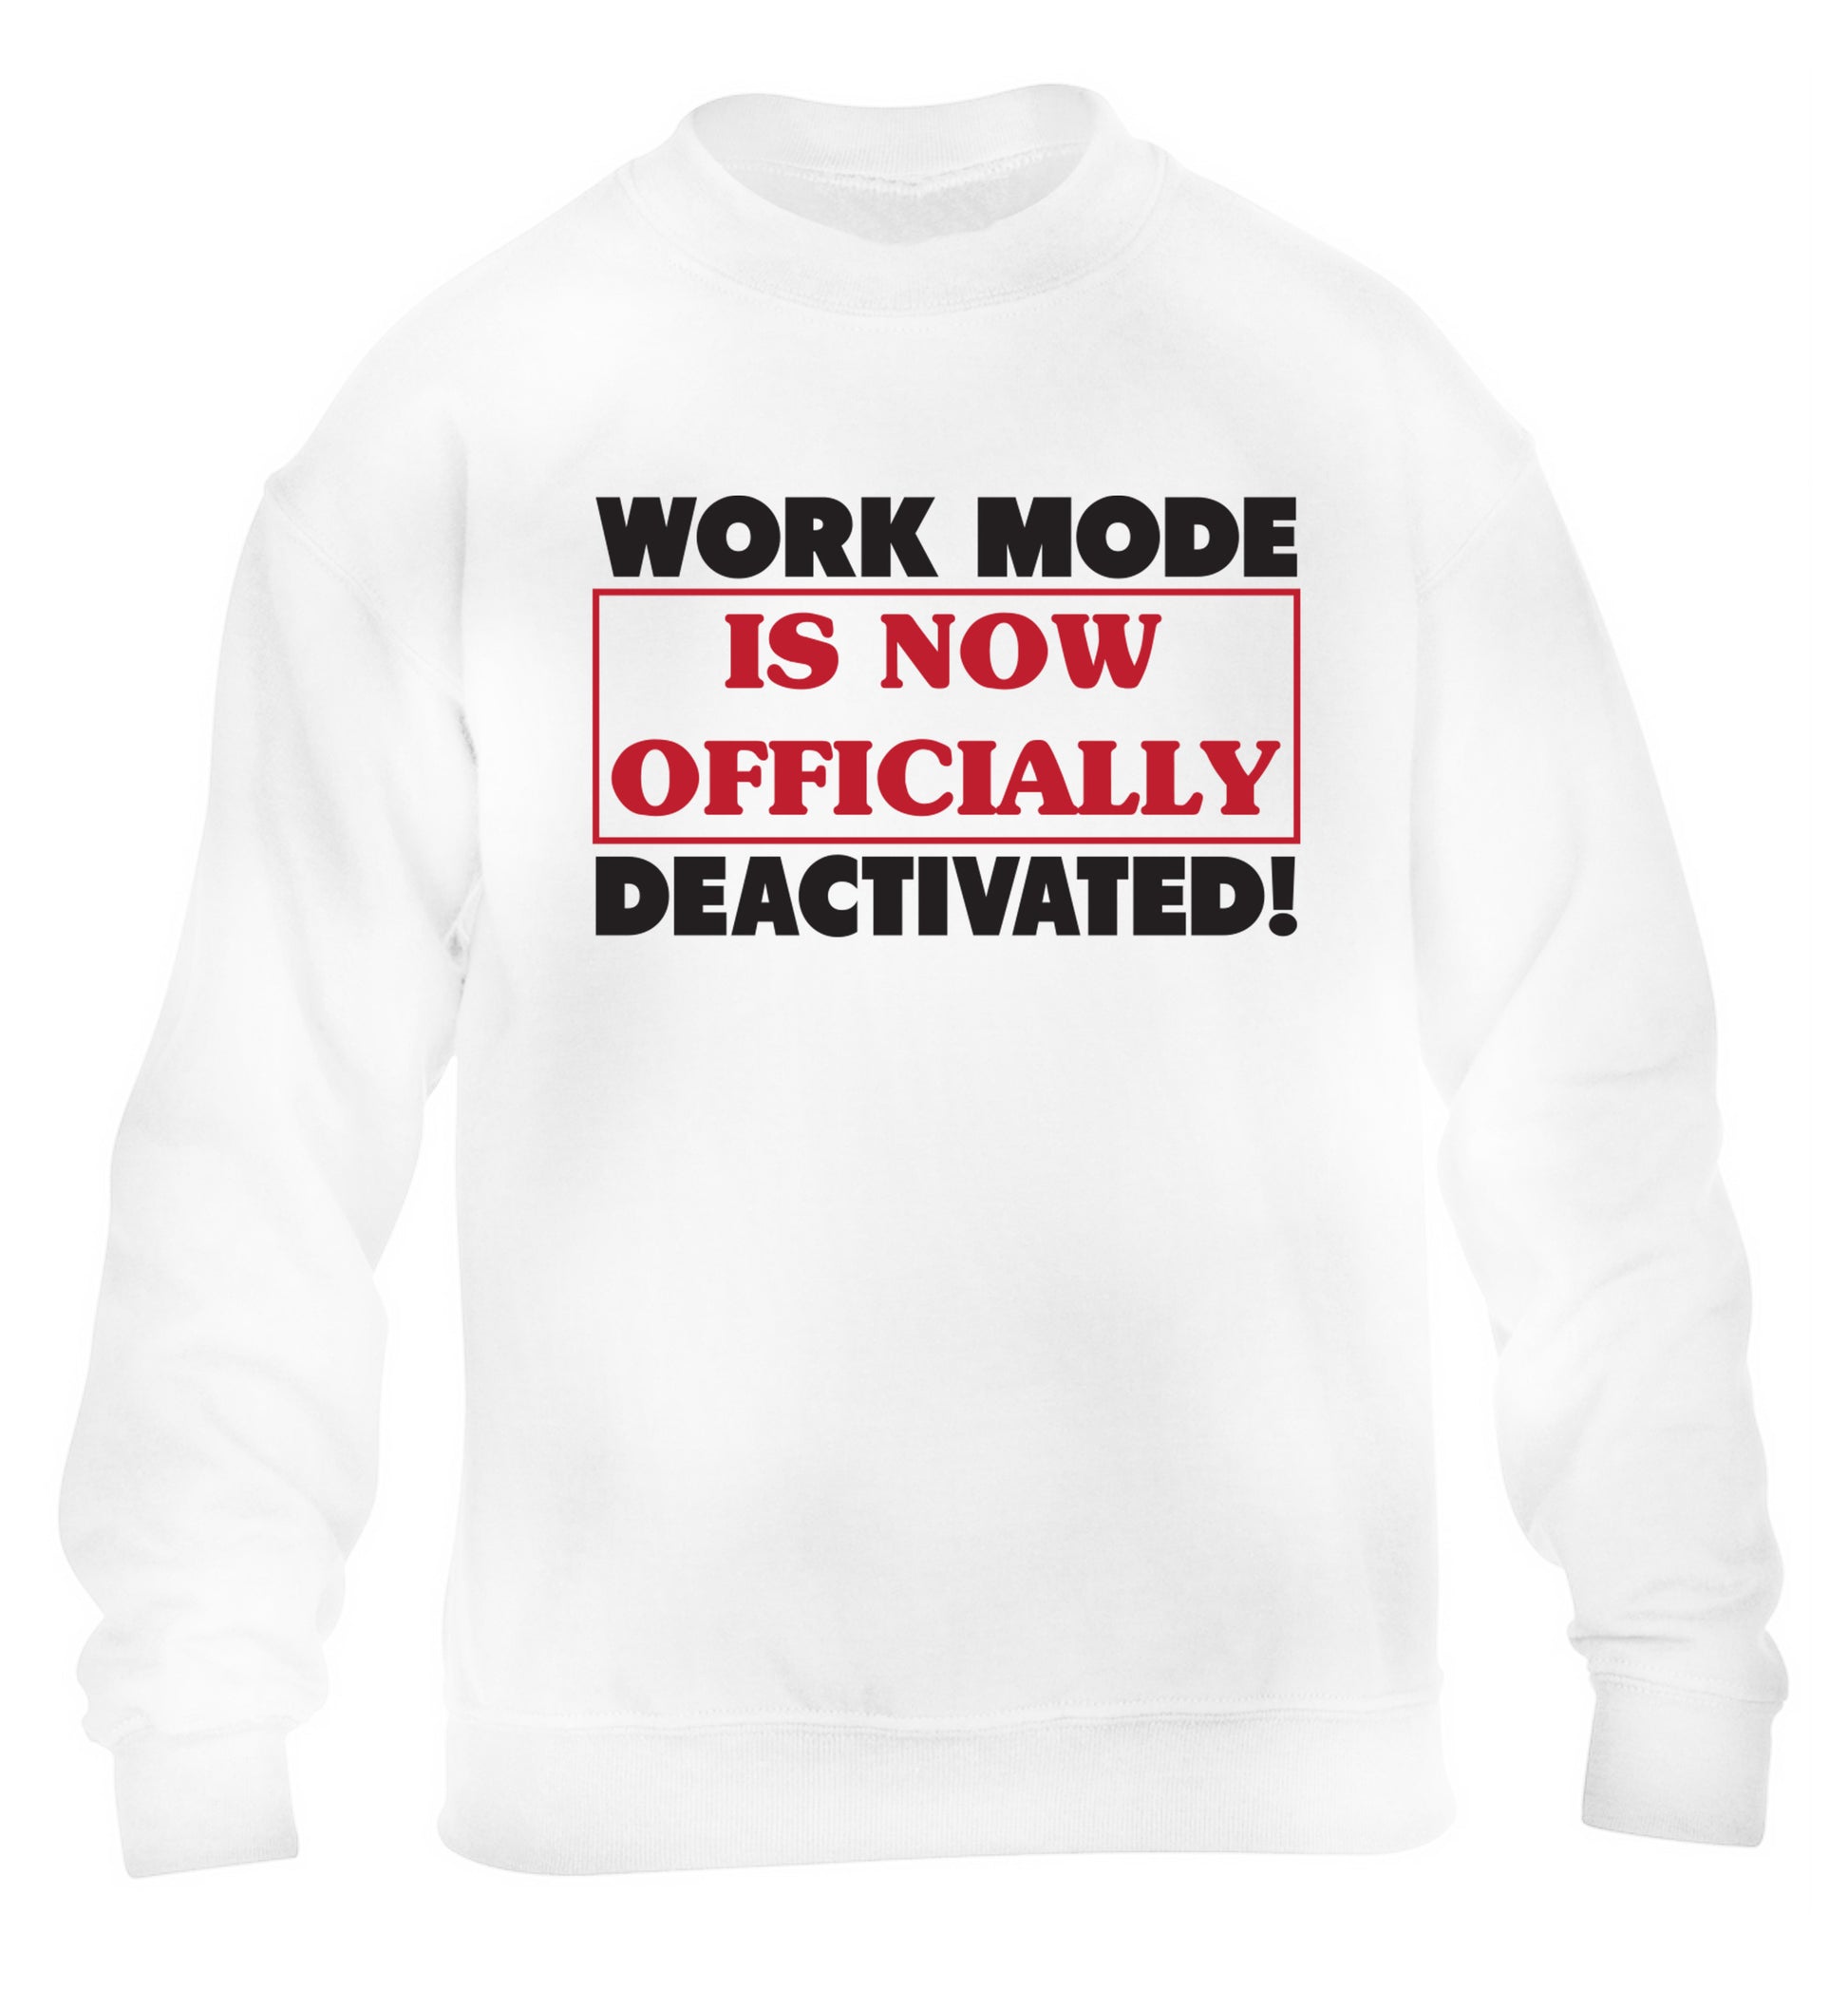 Work mode is now officially deactivated children's white sweater 12-13 Years